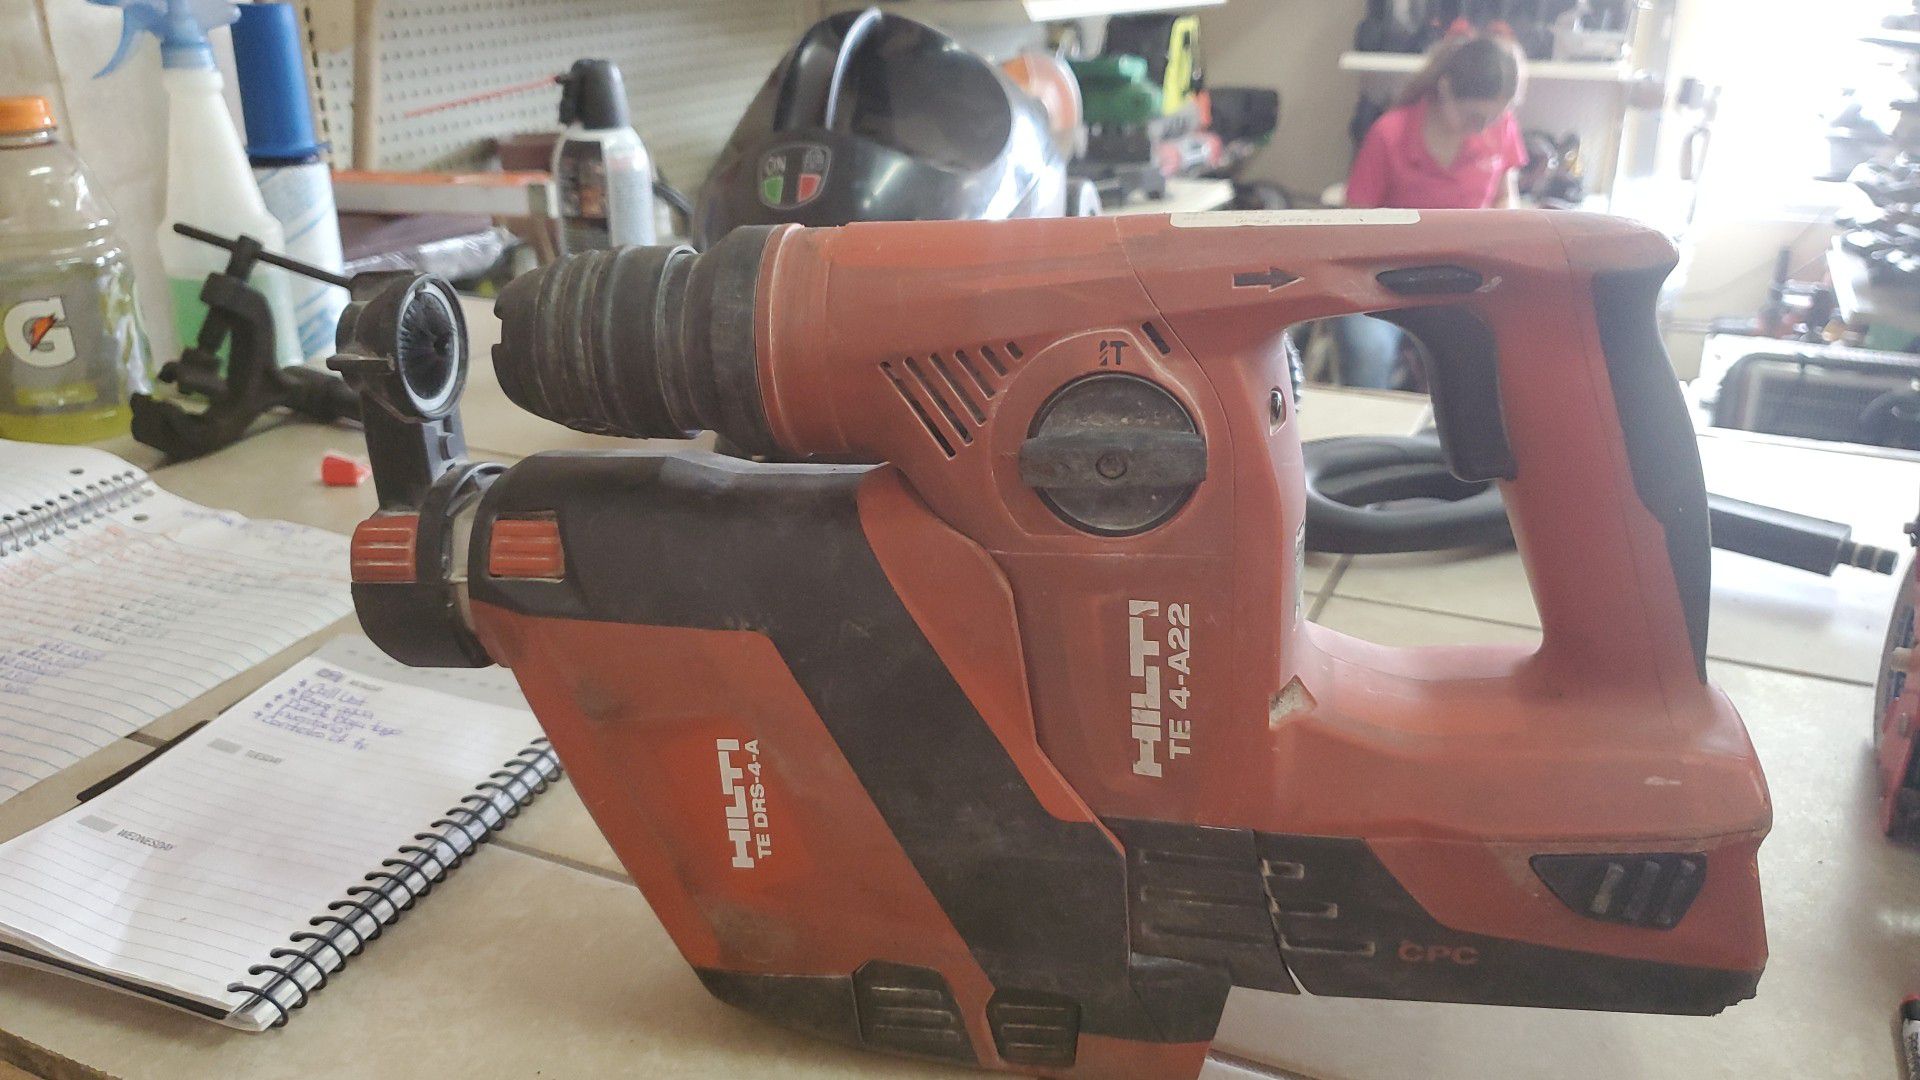 Hilti hammer drill with dust pan